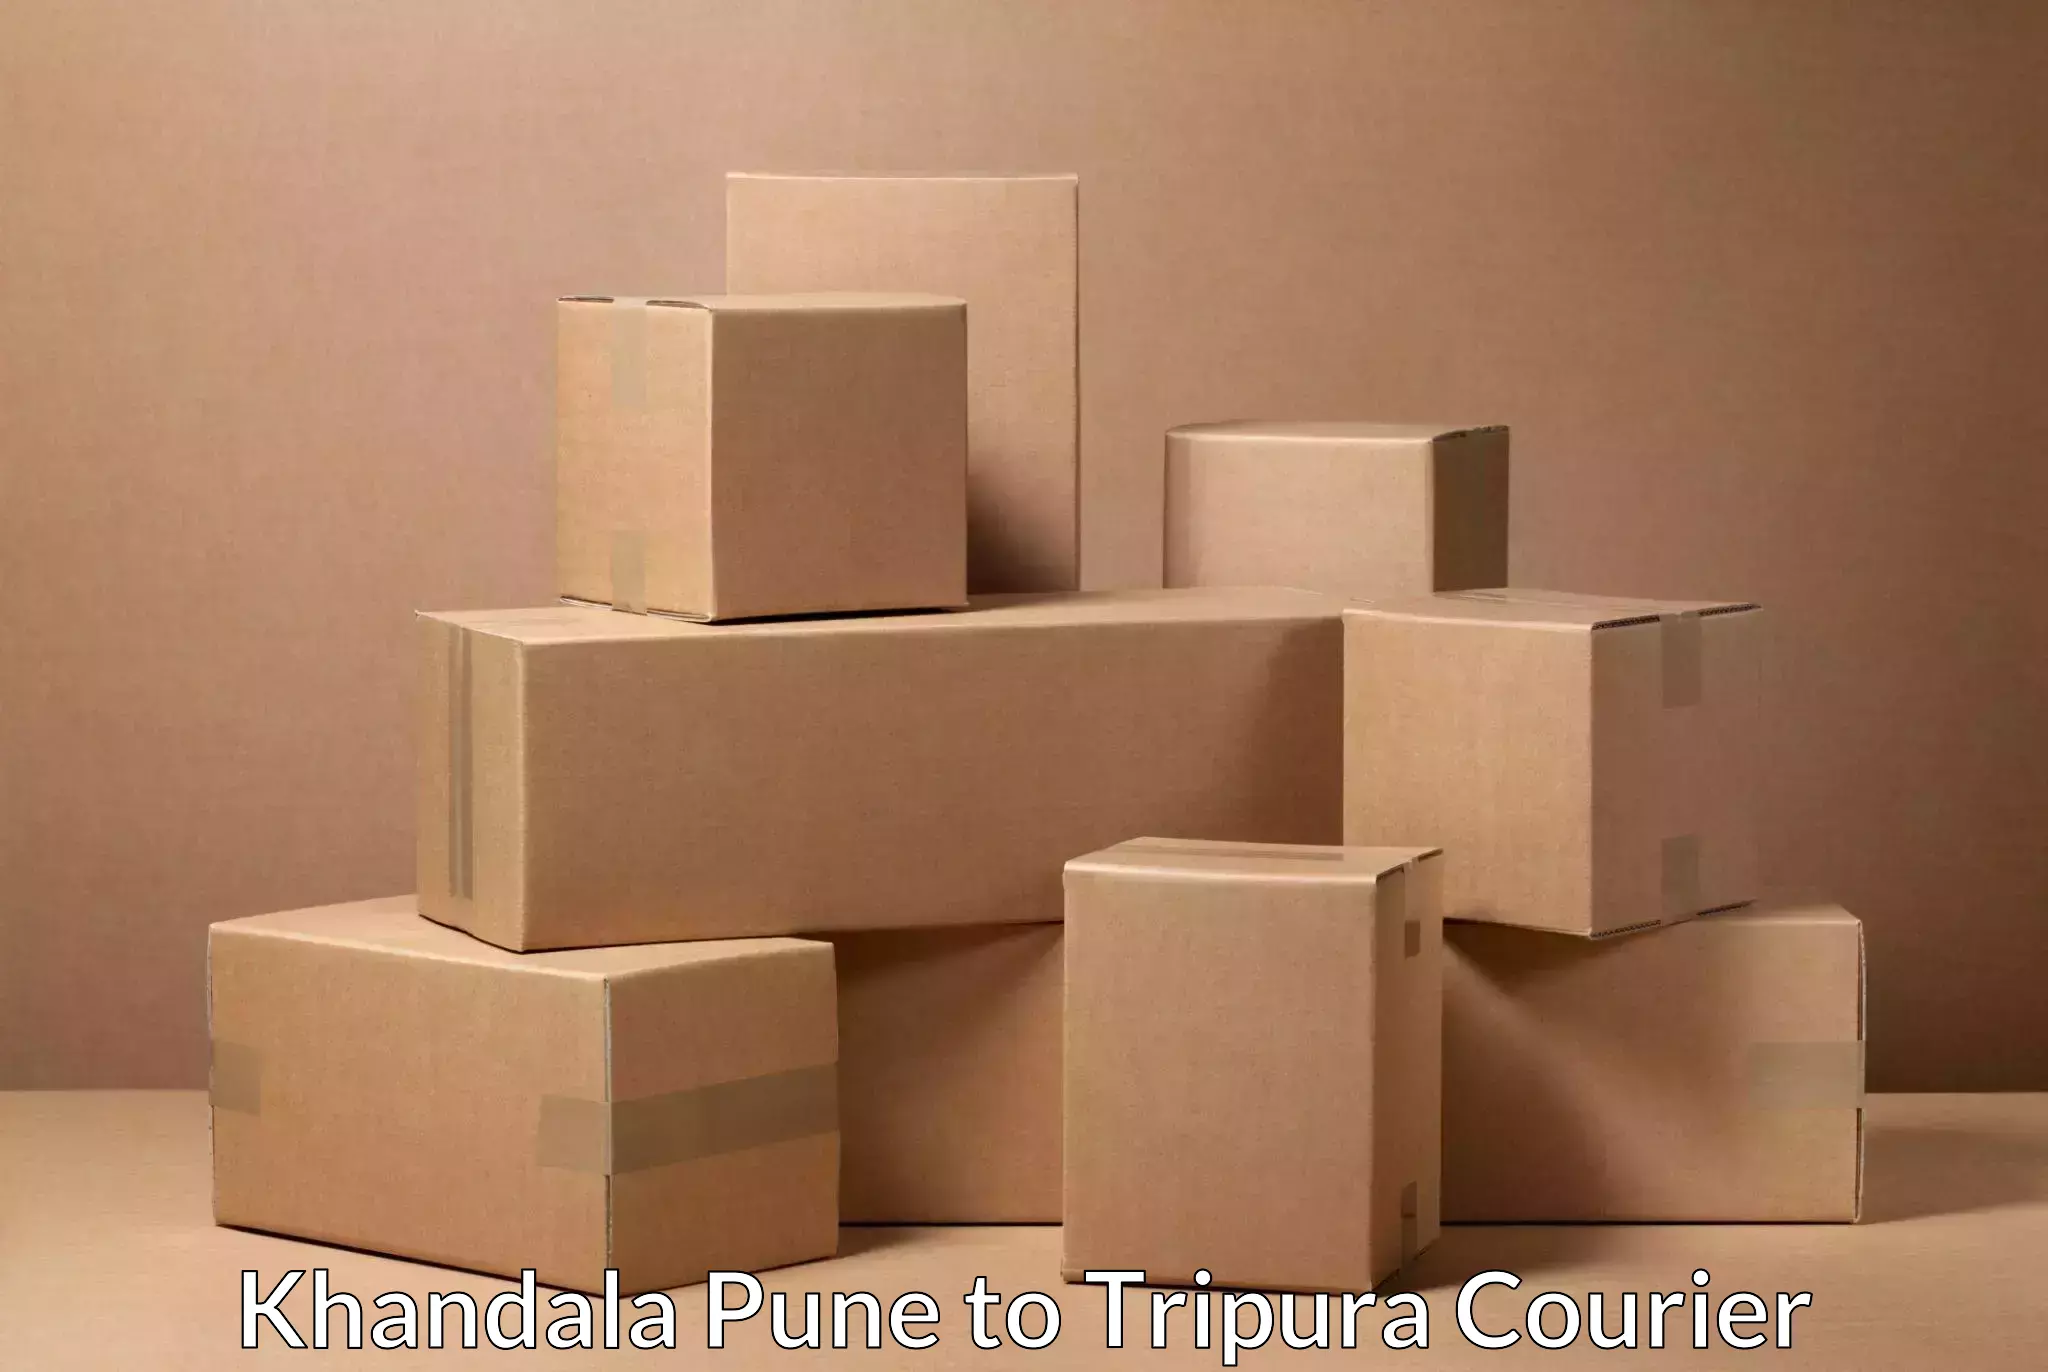 Multi-national courier services Khandala Pune to Manughat